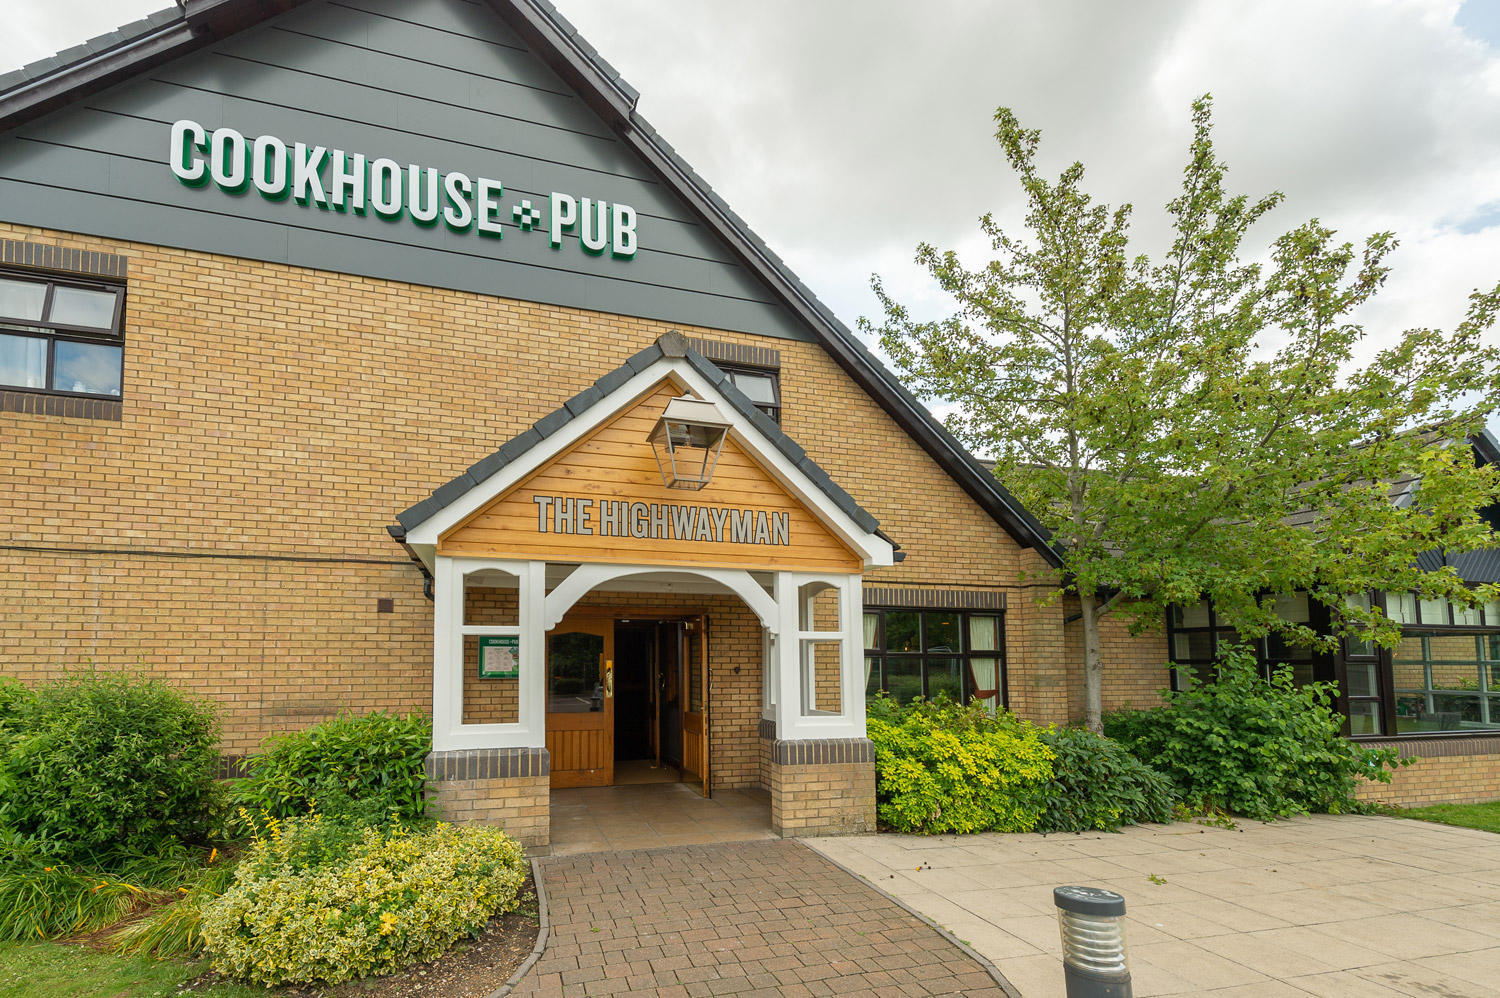 Images The Highwayman Cookhouse + Pub